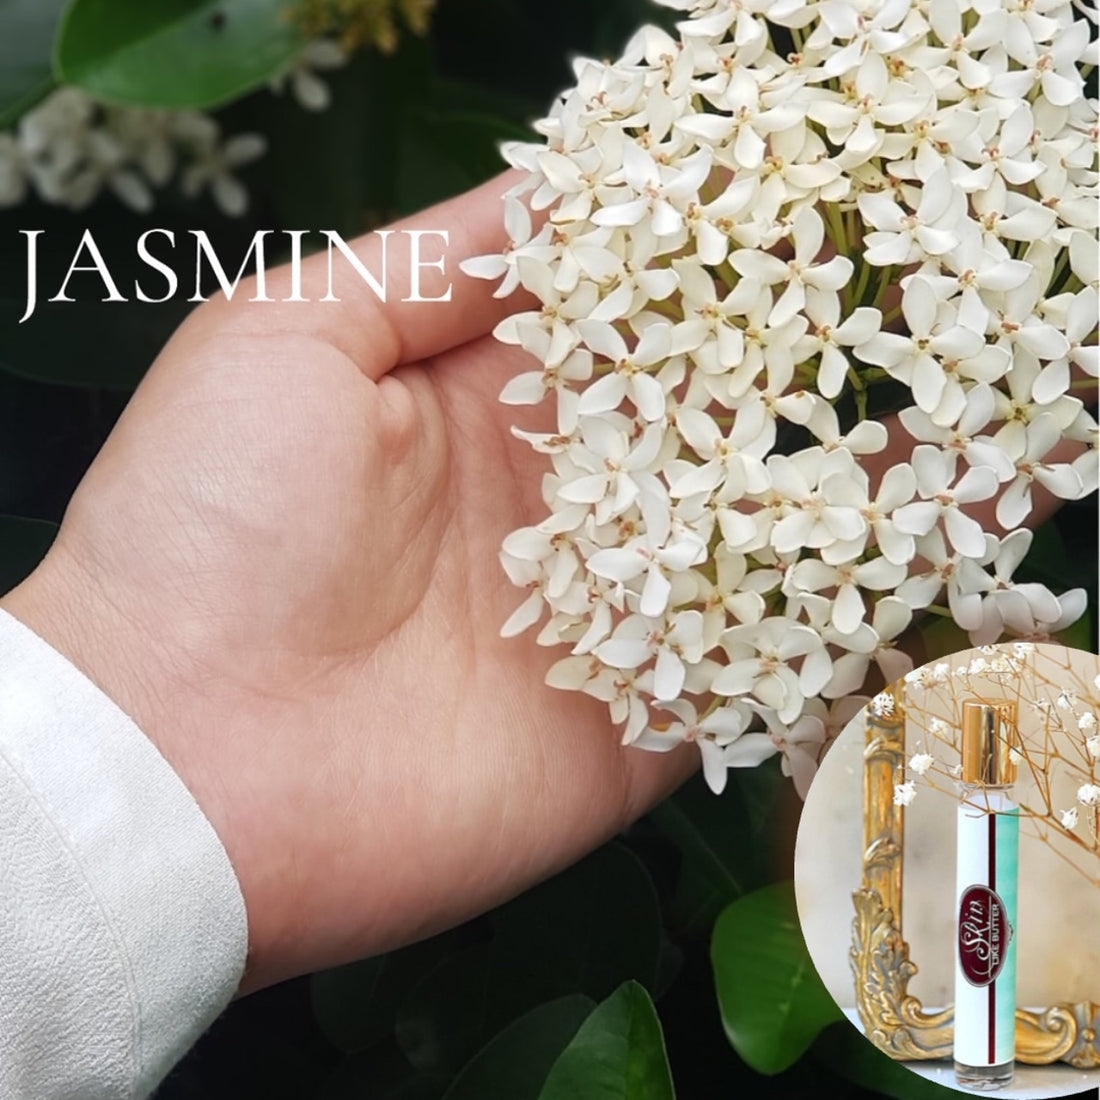 JASMINE Roll on Perfume Sale! ~ Buy 1 get 1 50% off-use coupon code 2PLEASE